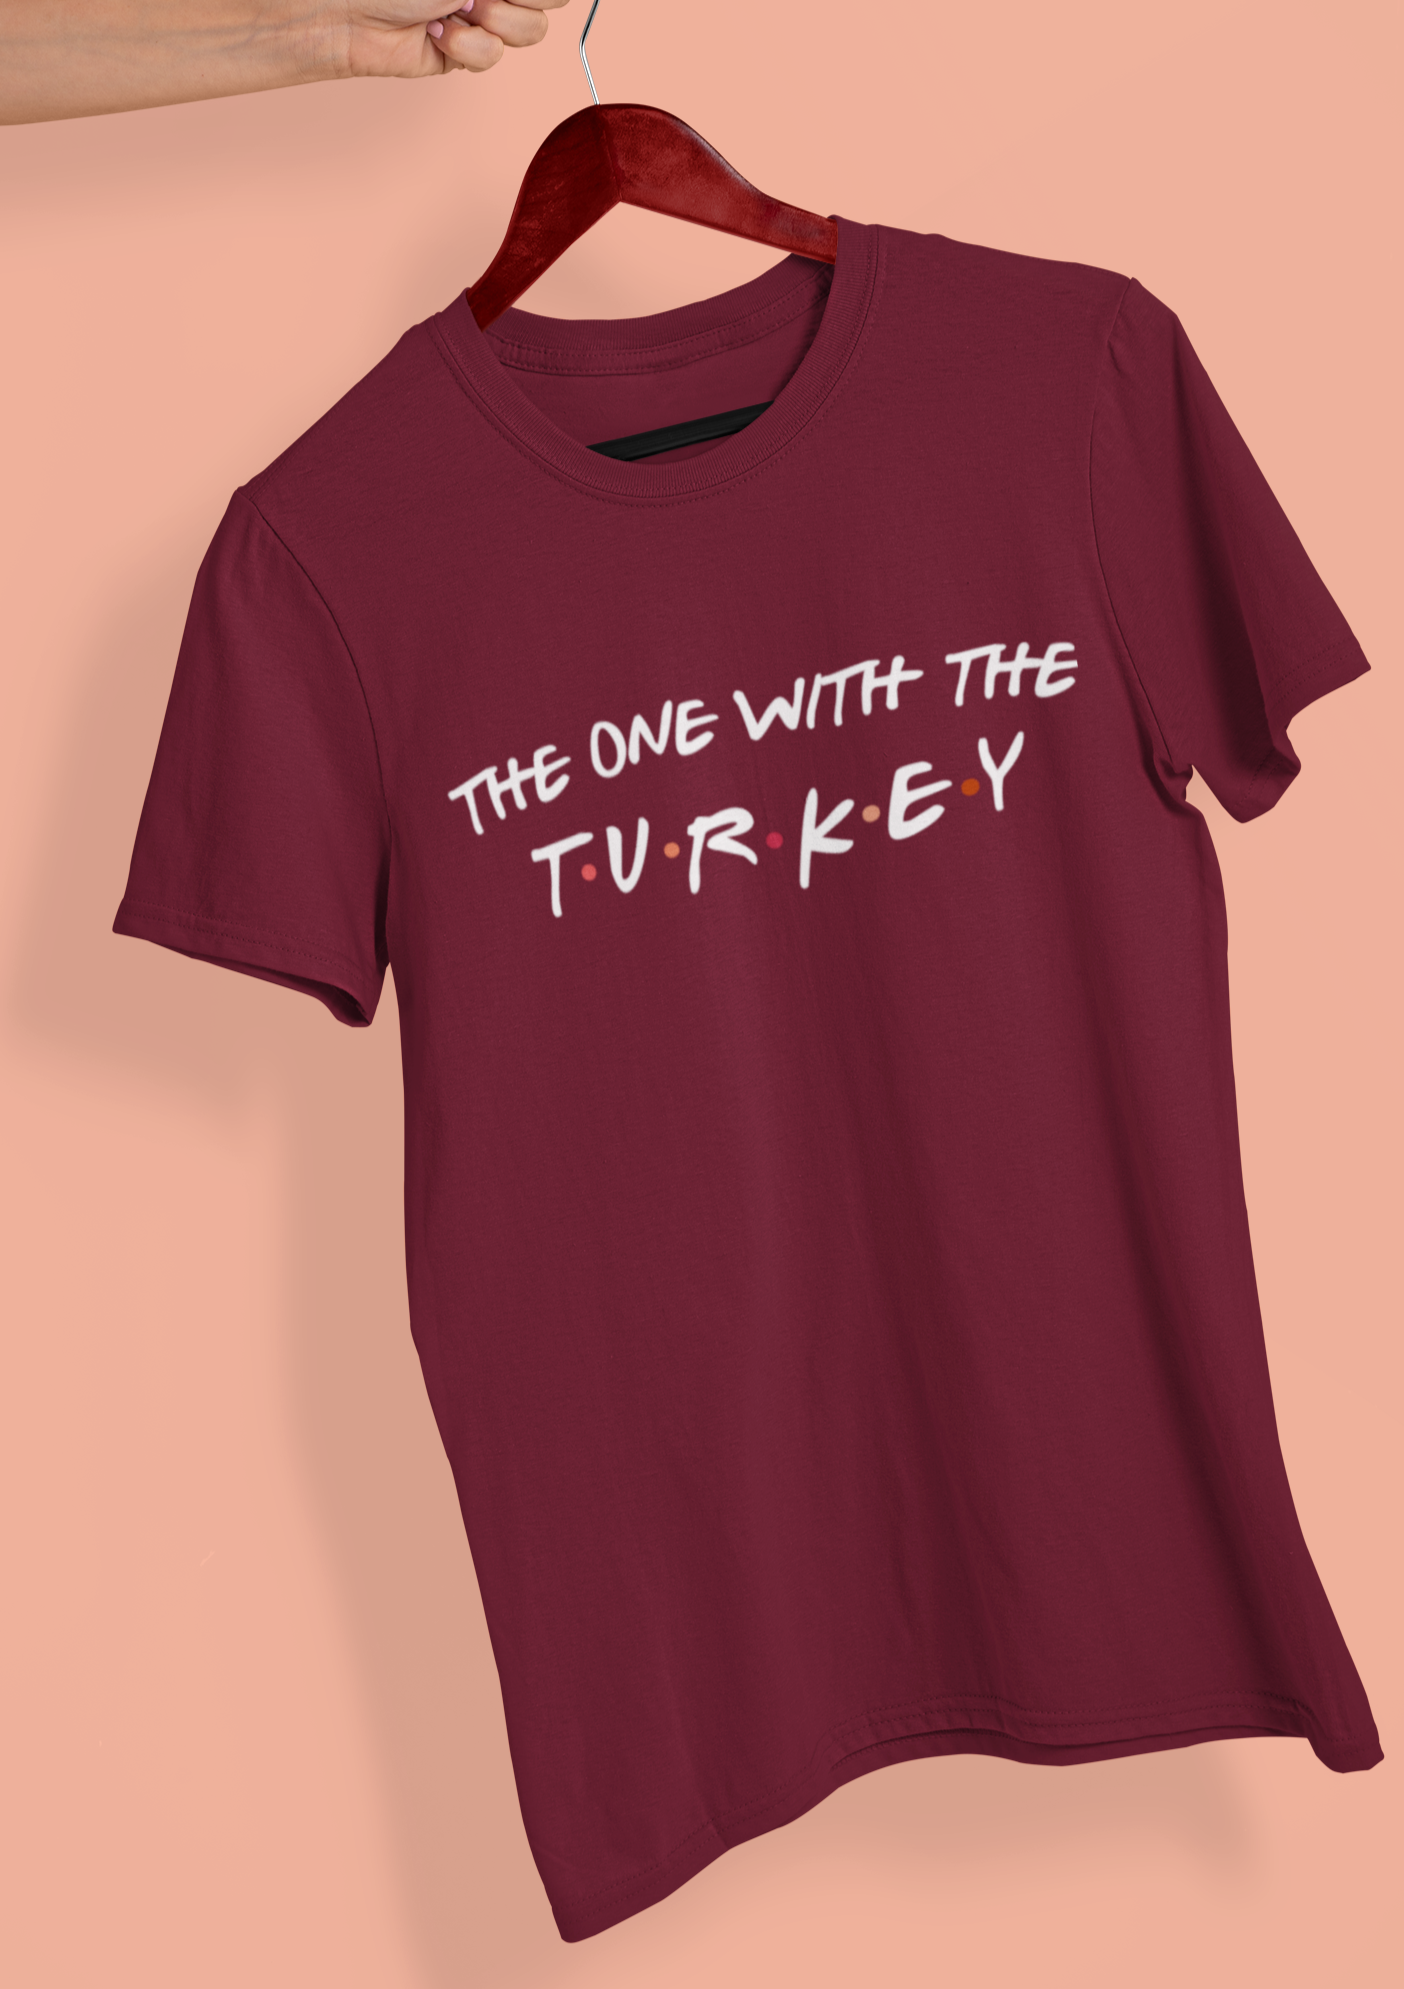 Maroon shirt saying the one with the turkey - HighCiti